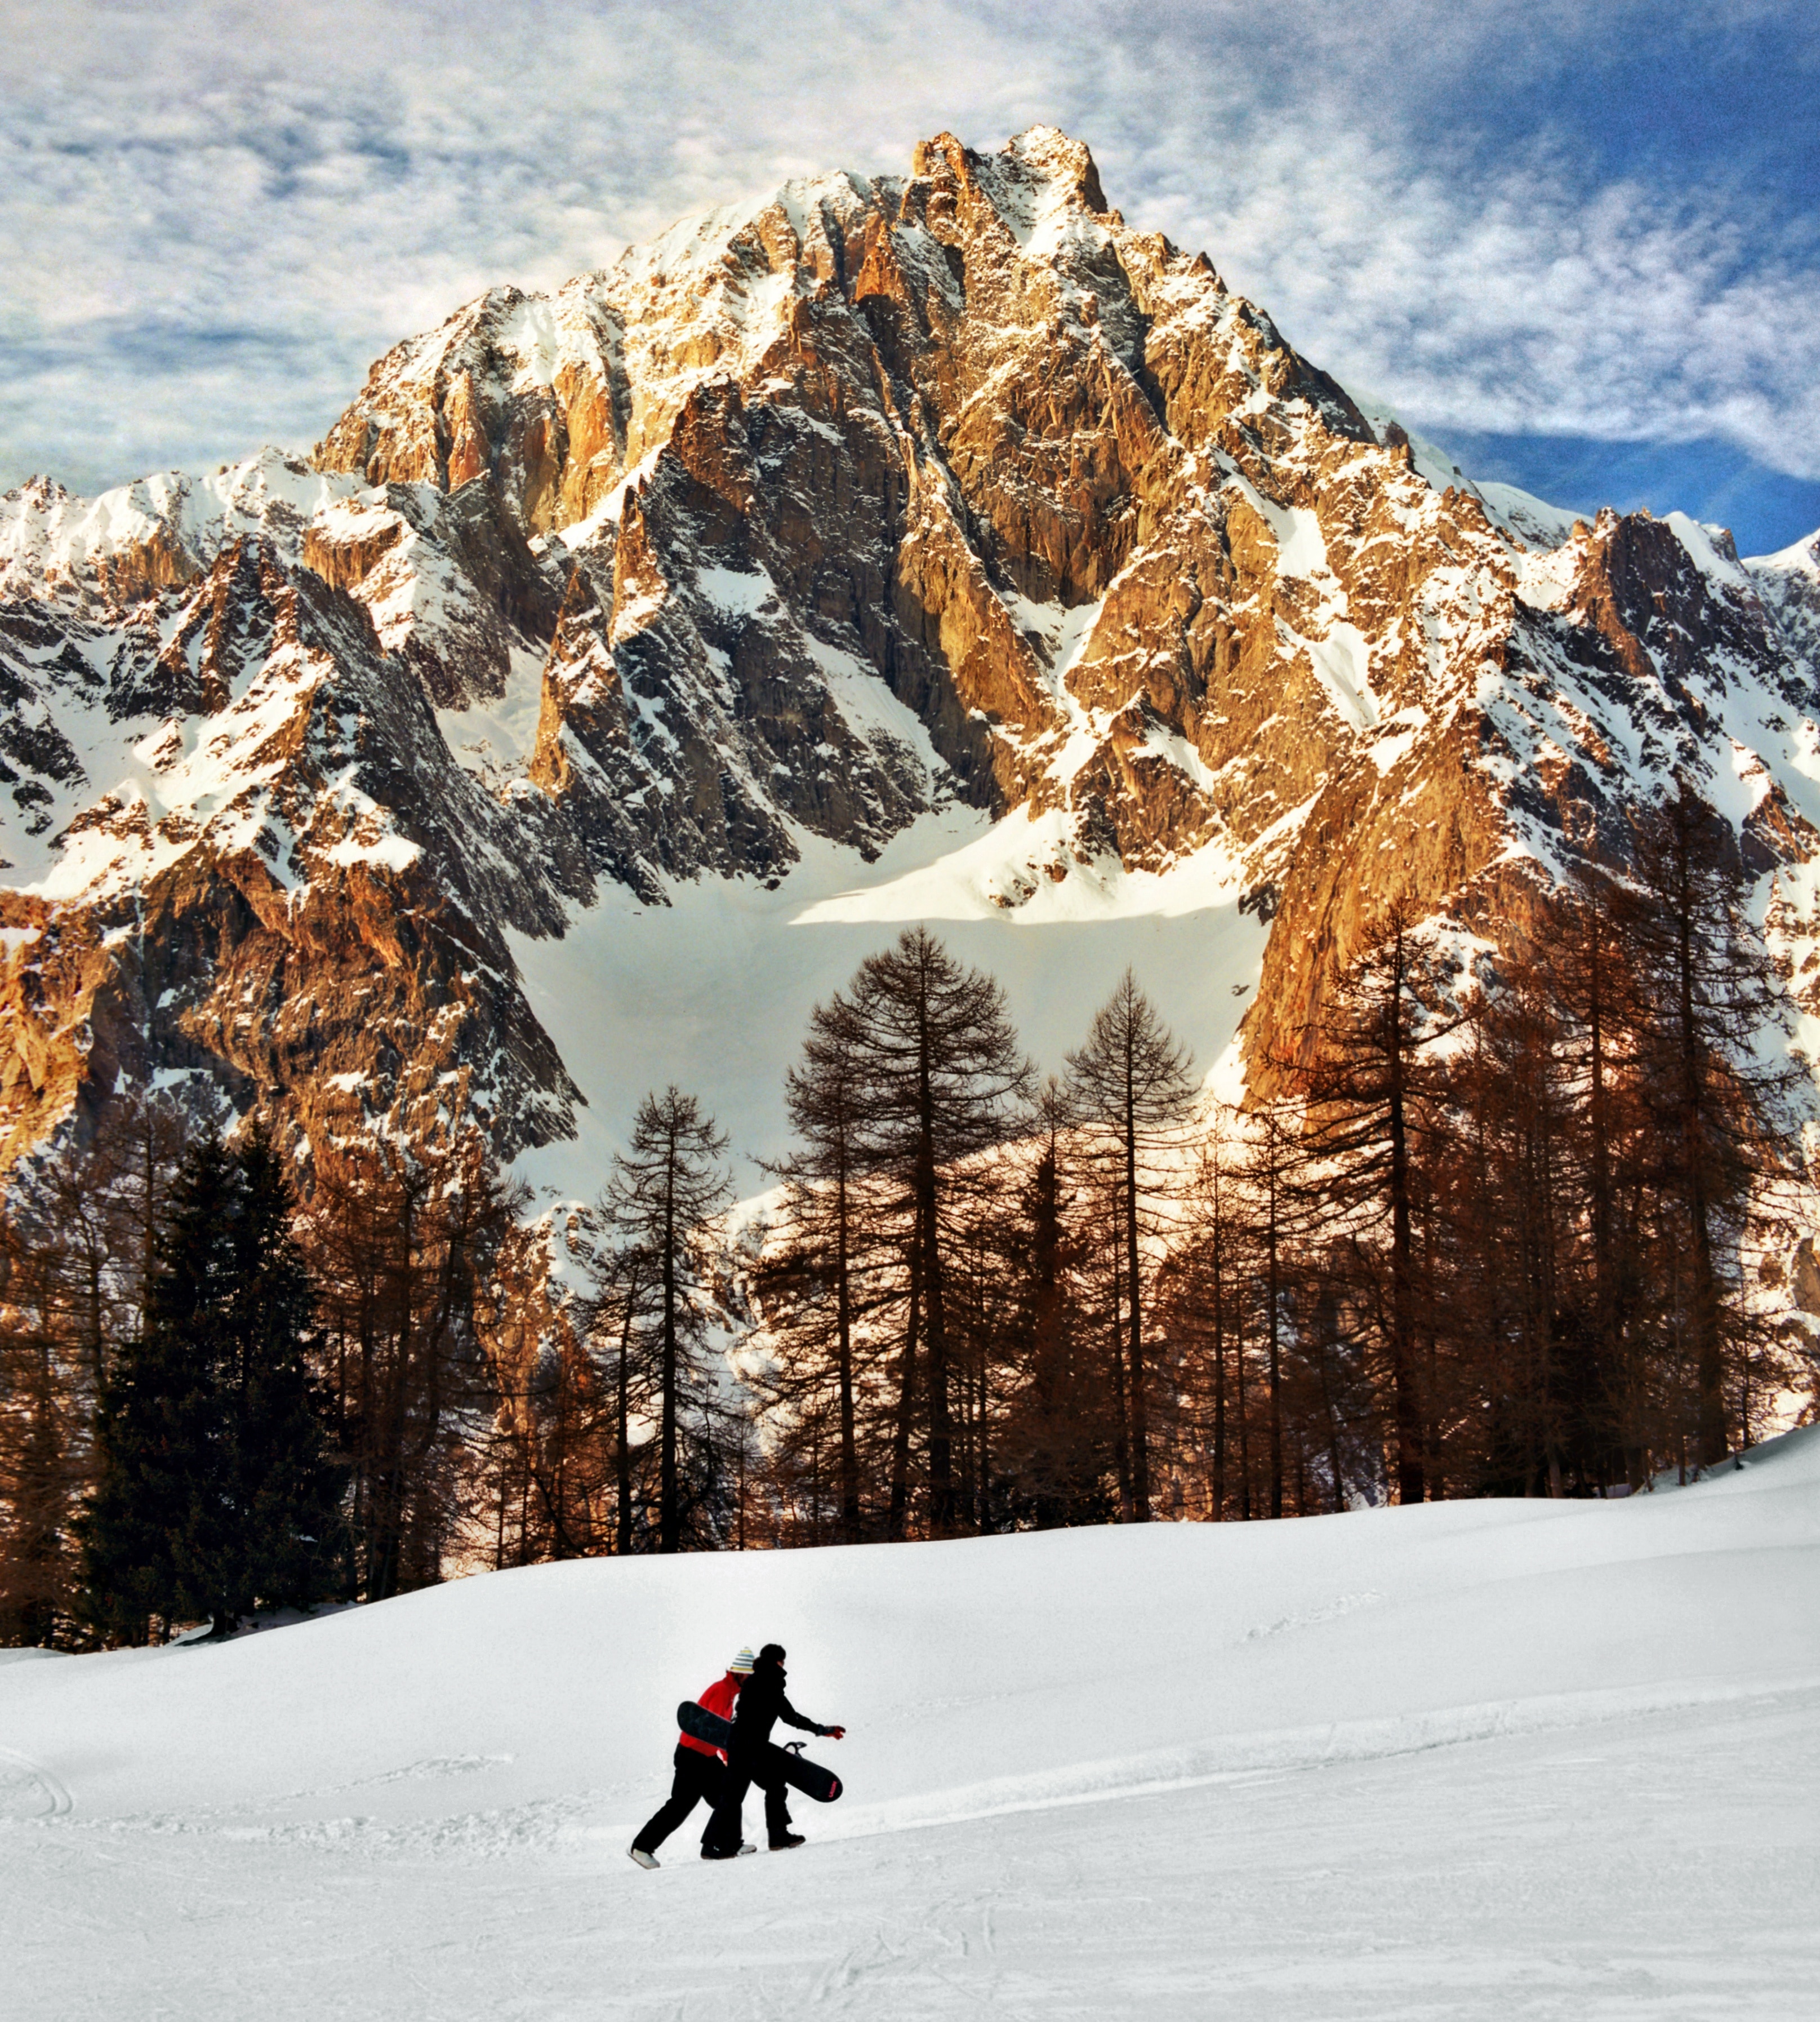 <h2>Top places to stay near the slopes</h2>